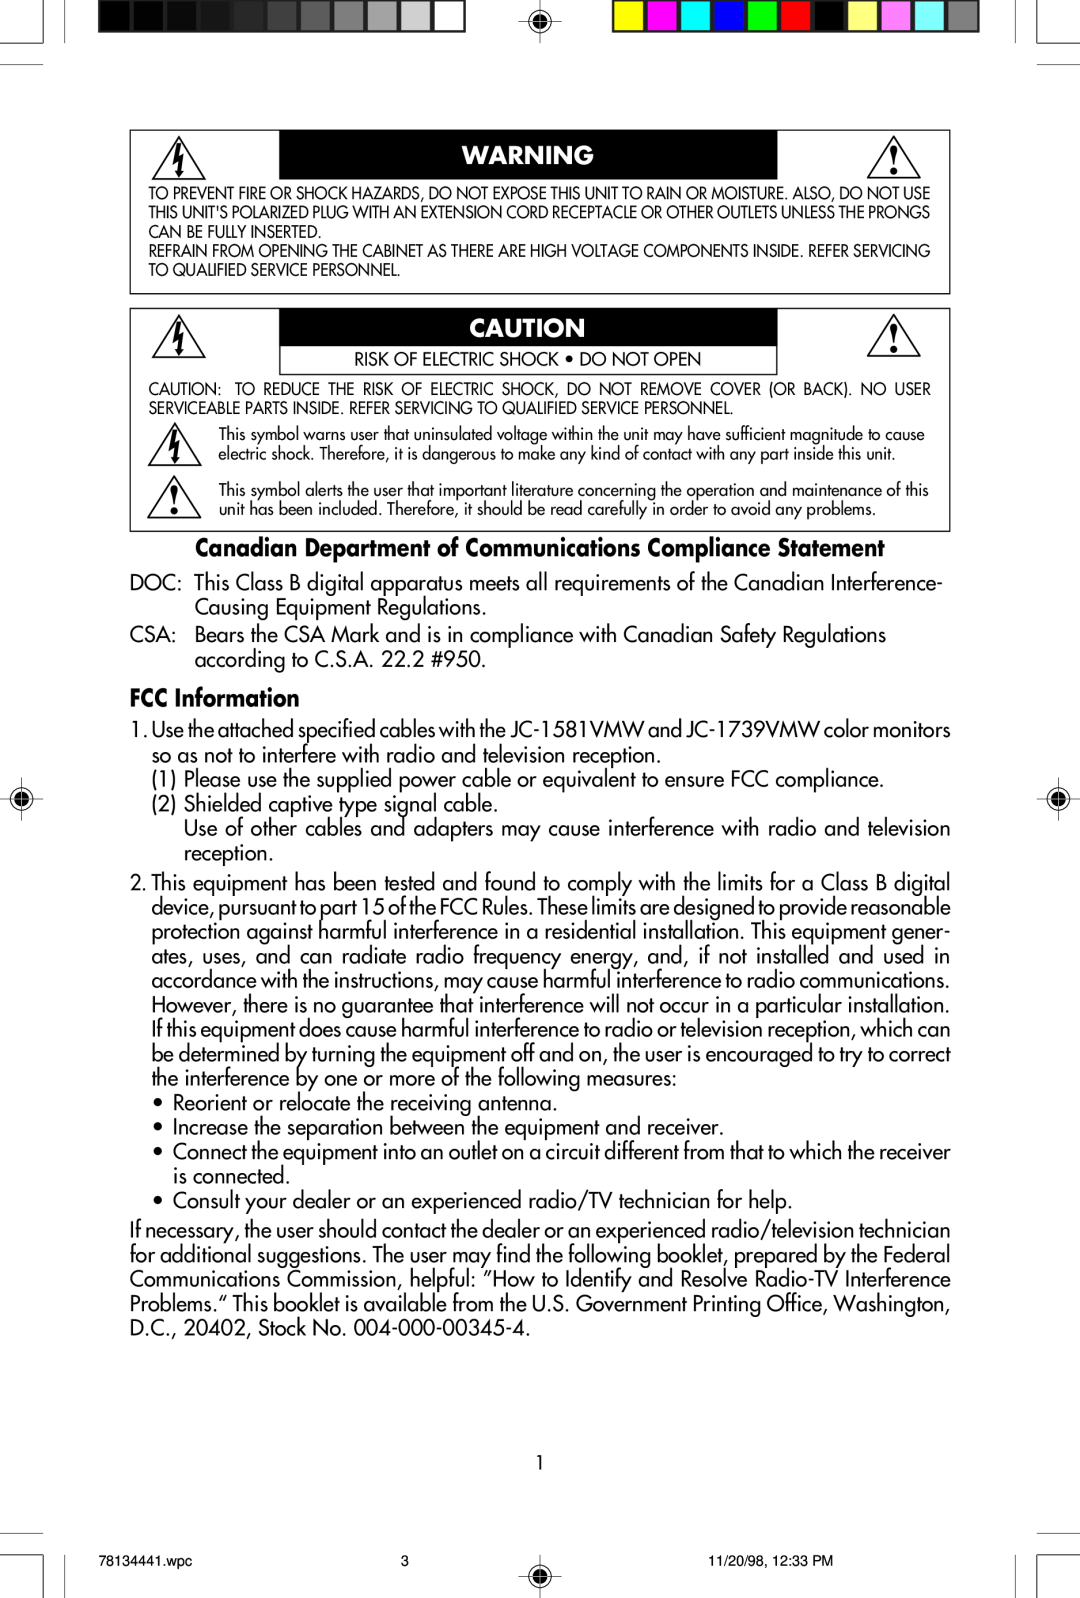 NEC A700+TM, A500+TM user manual Canadian Department of Communications Compliance Statement, FCC Information 